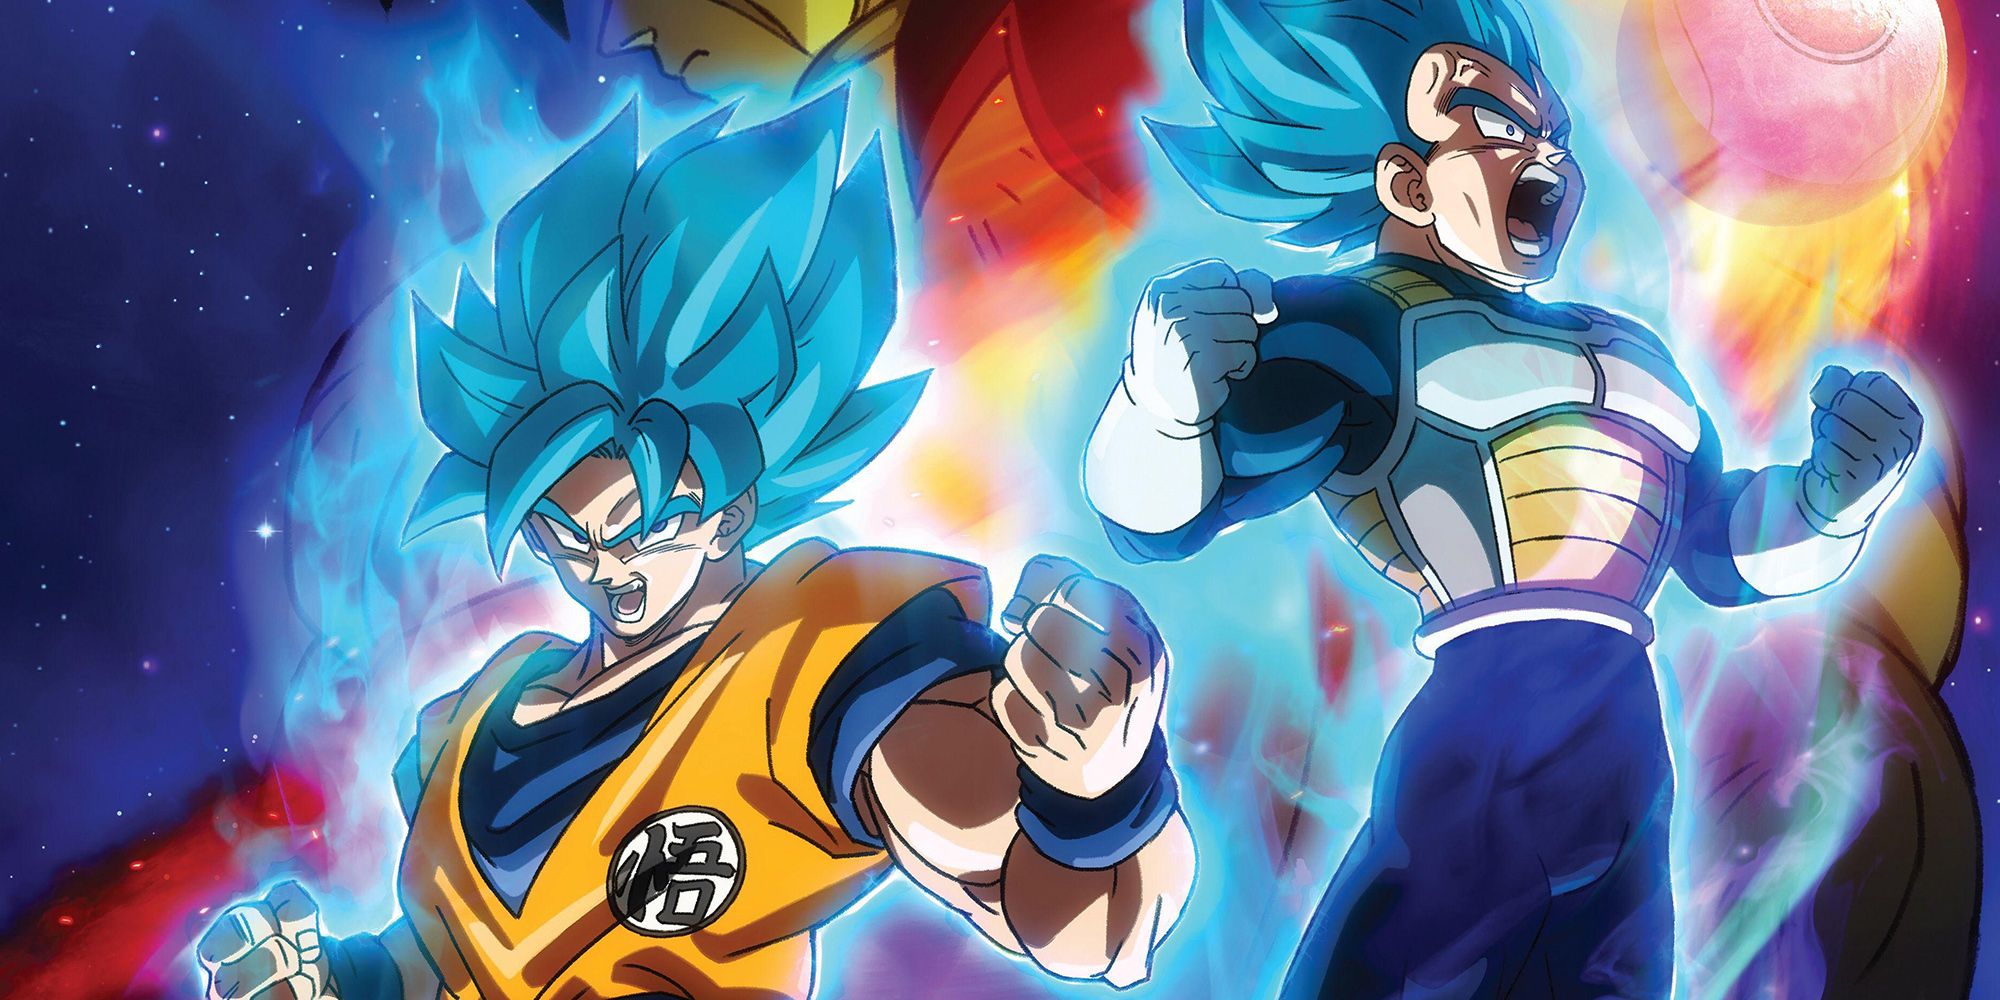 Dragon Ball Super Vegeta And Goku In SSGSS Looking Angry Together